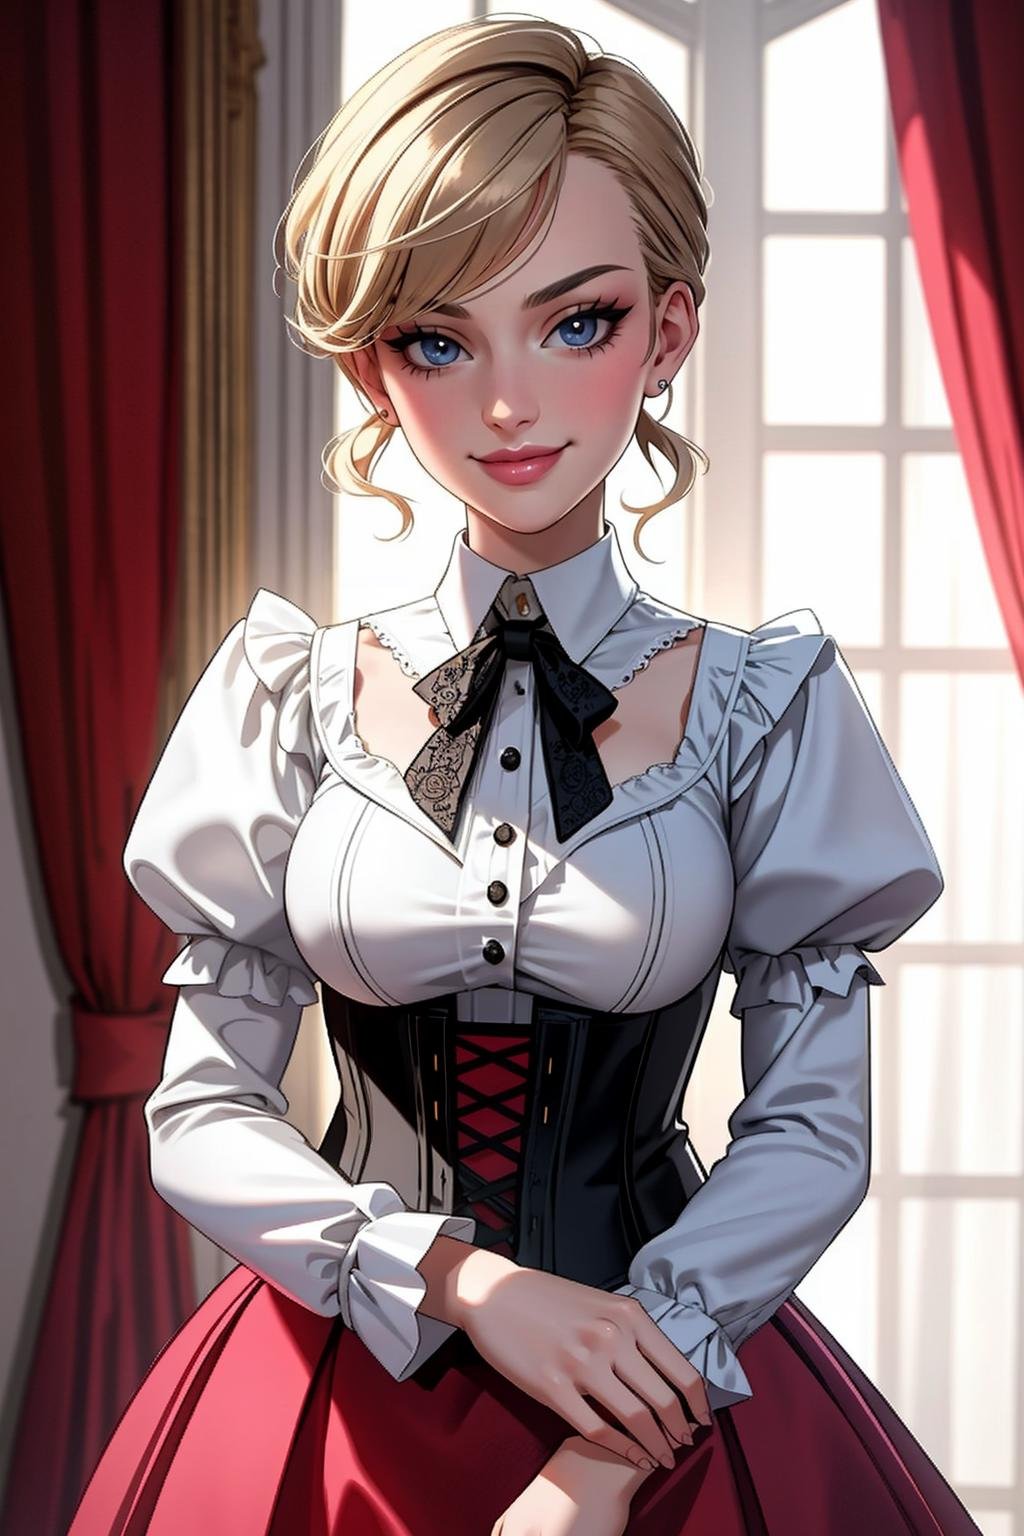 ((Masterpiece, best quality)), edgQuality,smirk,smug,Haute_Couture,edgCT, a woman in a ([blouse,chic top|designer dress]::0.775) ,wearing edgCT,frilly skirt,corset, <lora:edgLycorisChic:0.8>